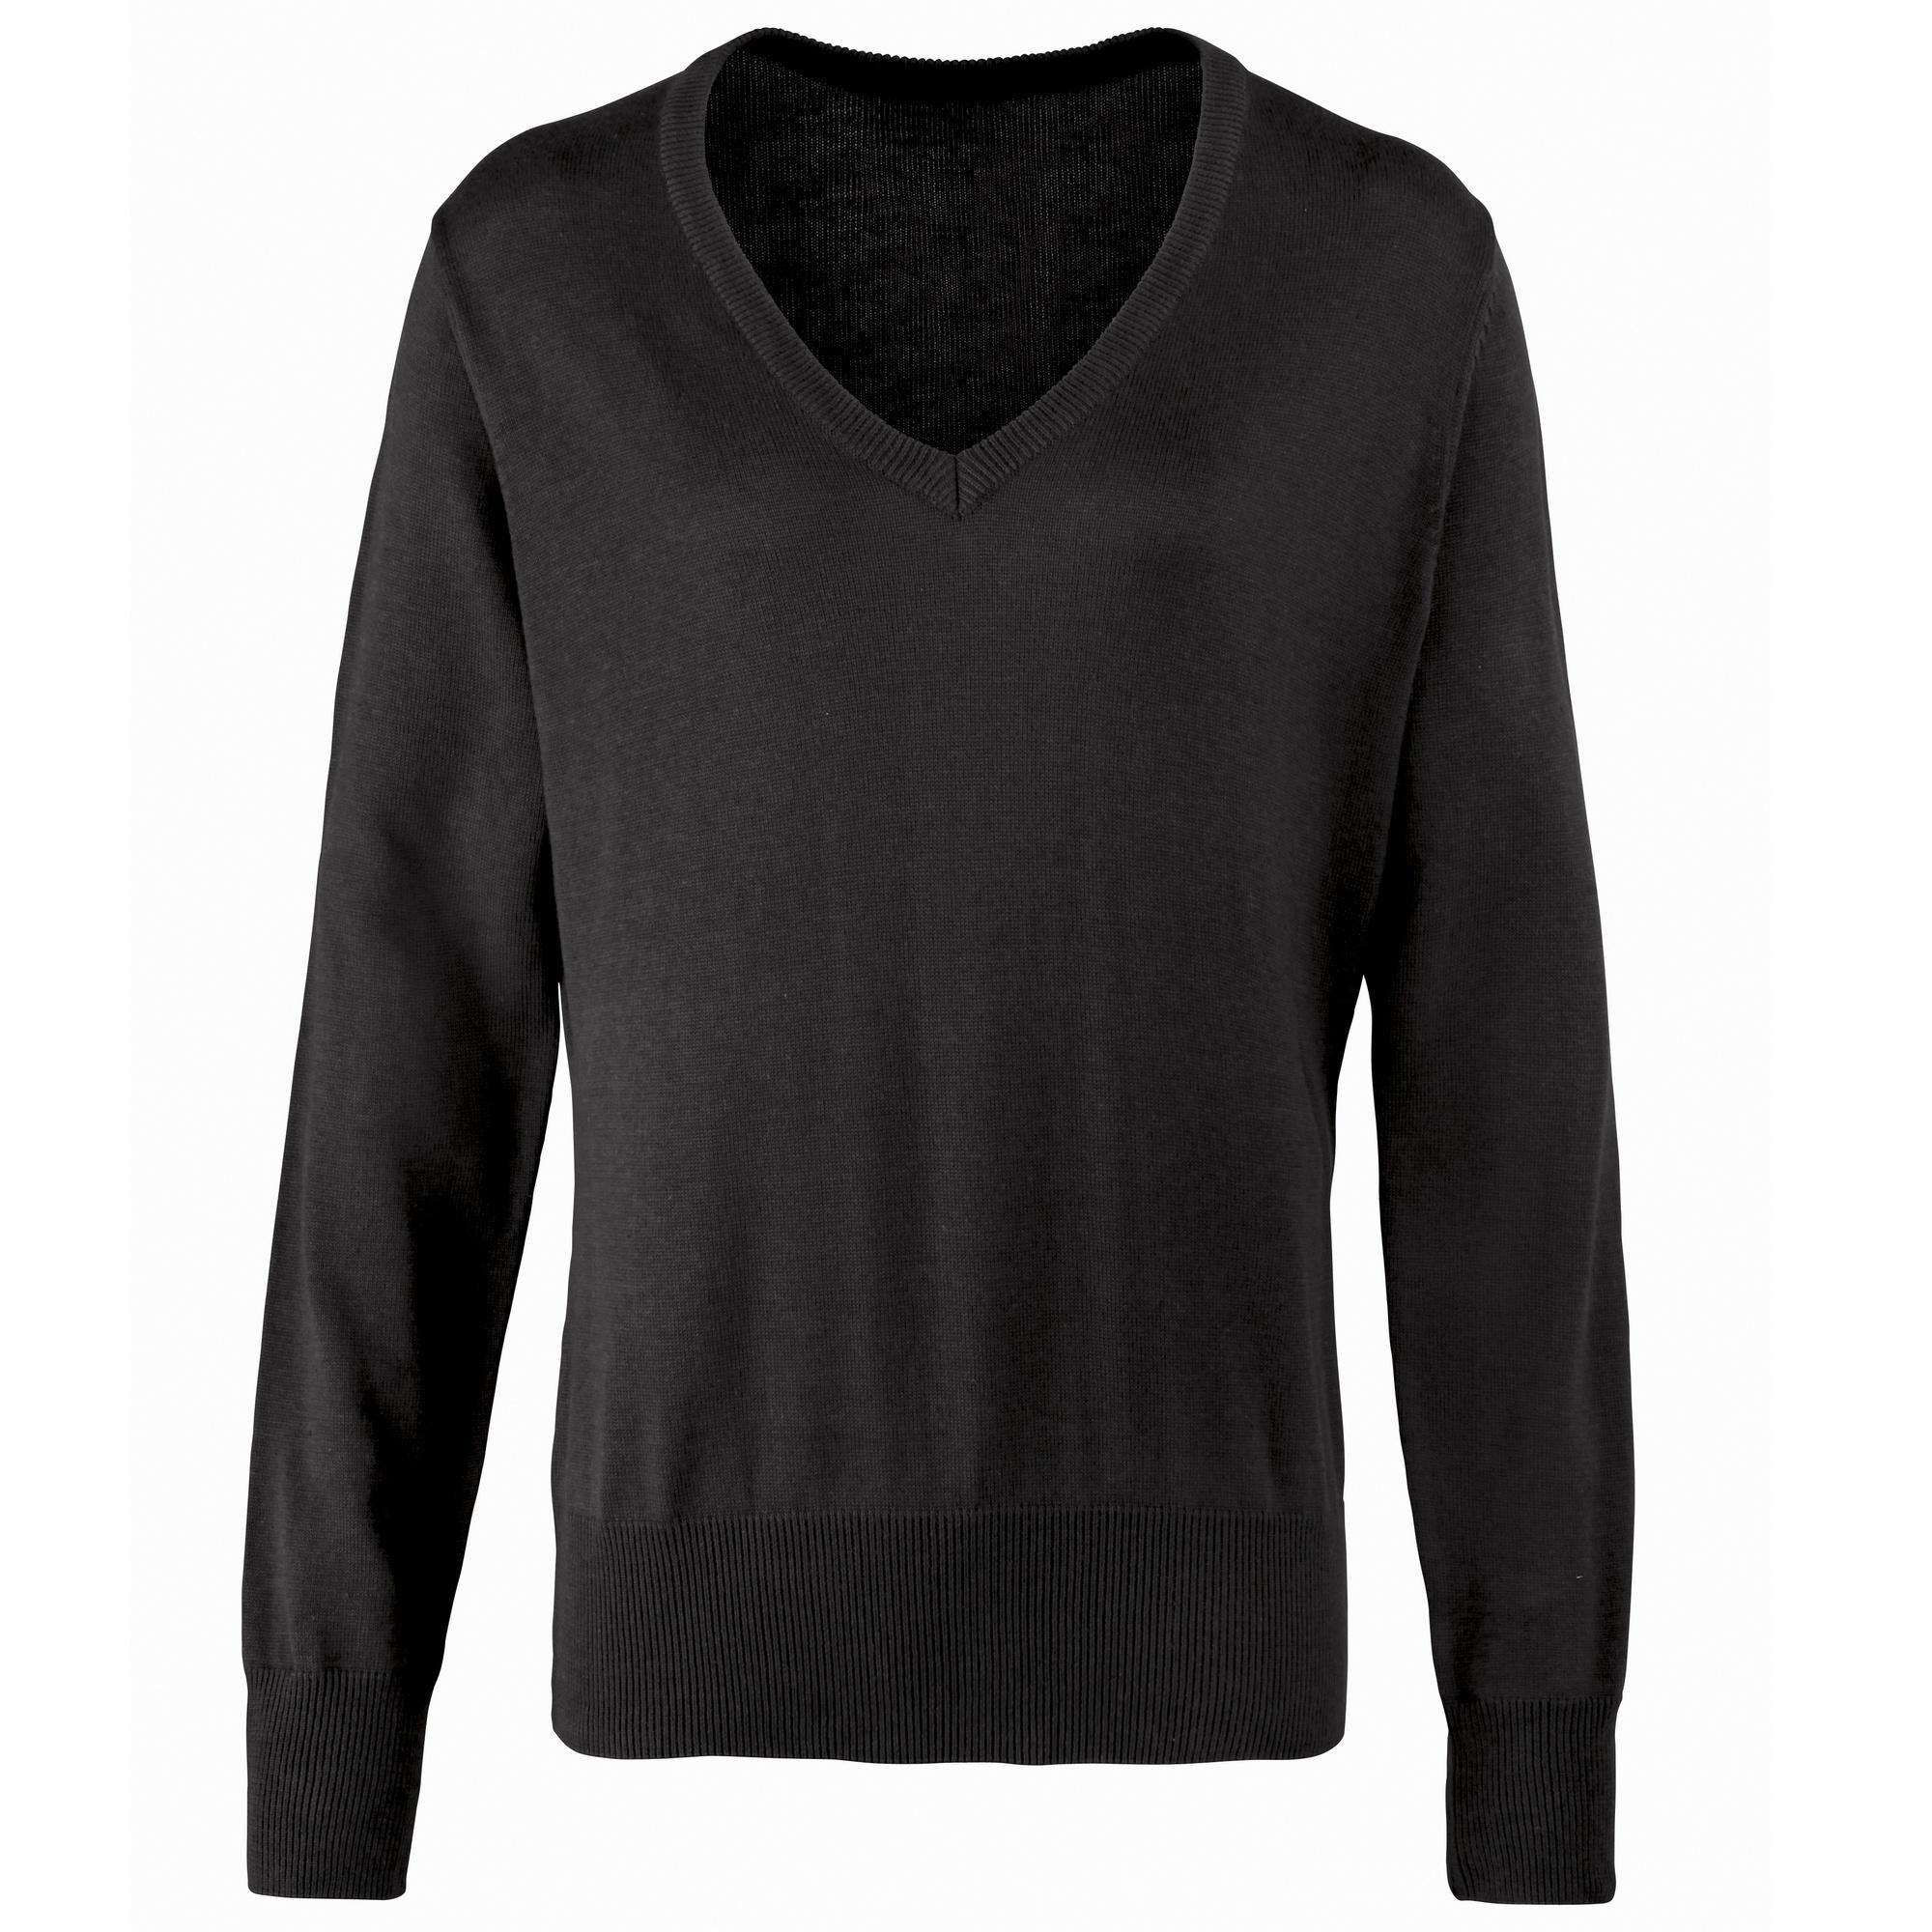 Premier Womens/Ladies V-Neck Knitted Sweater / Top (Black) (10)